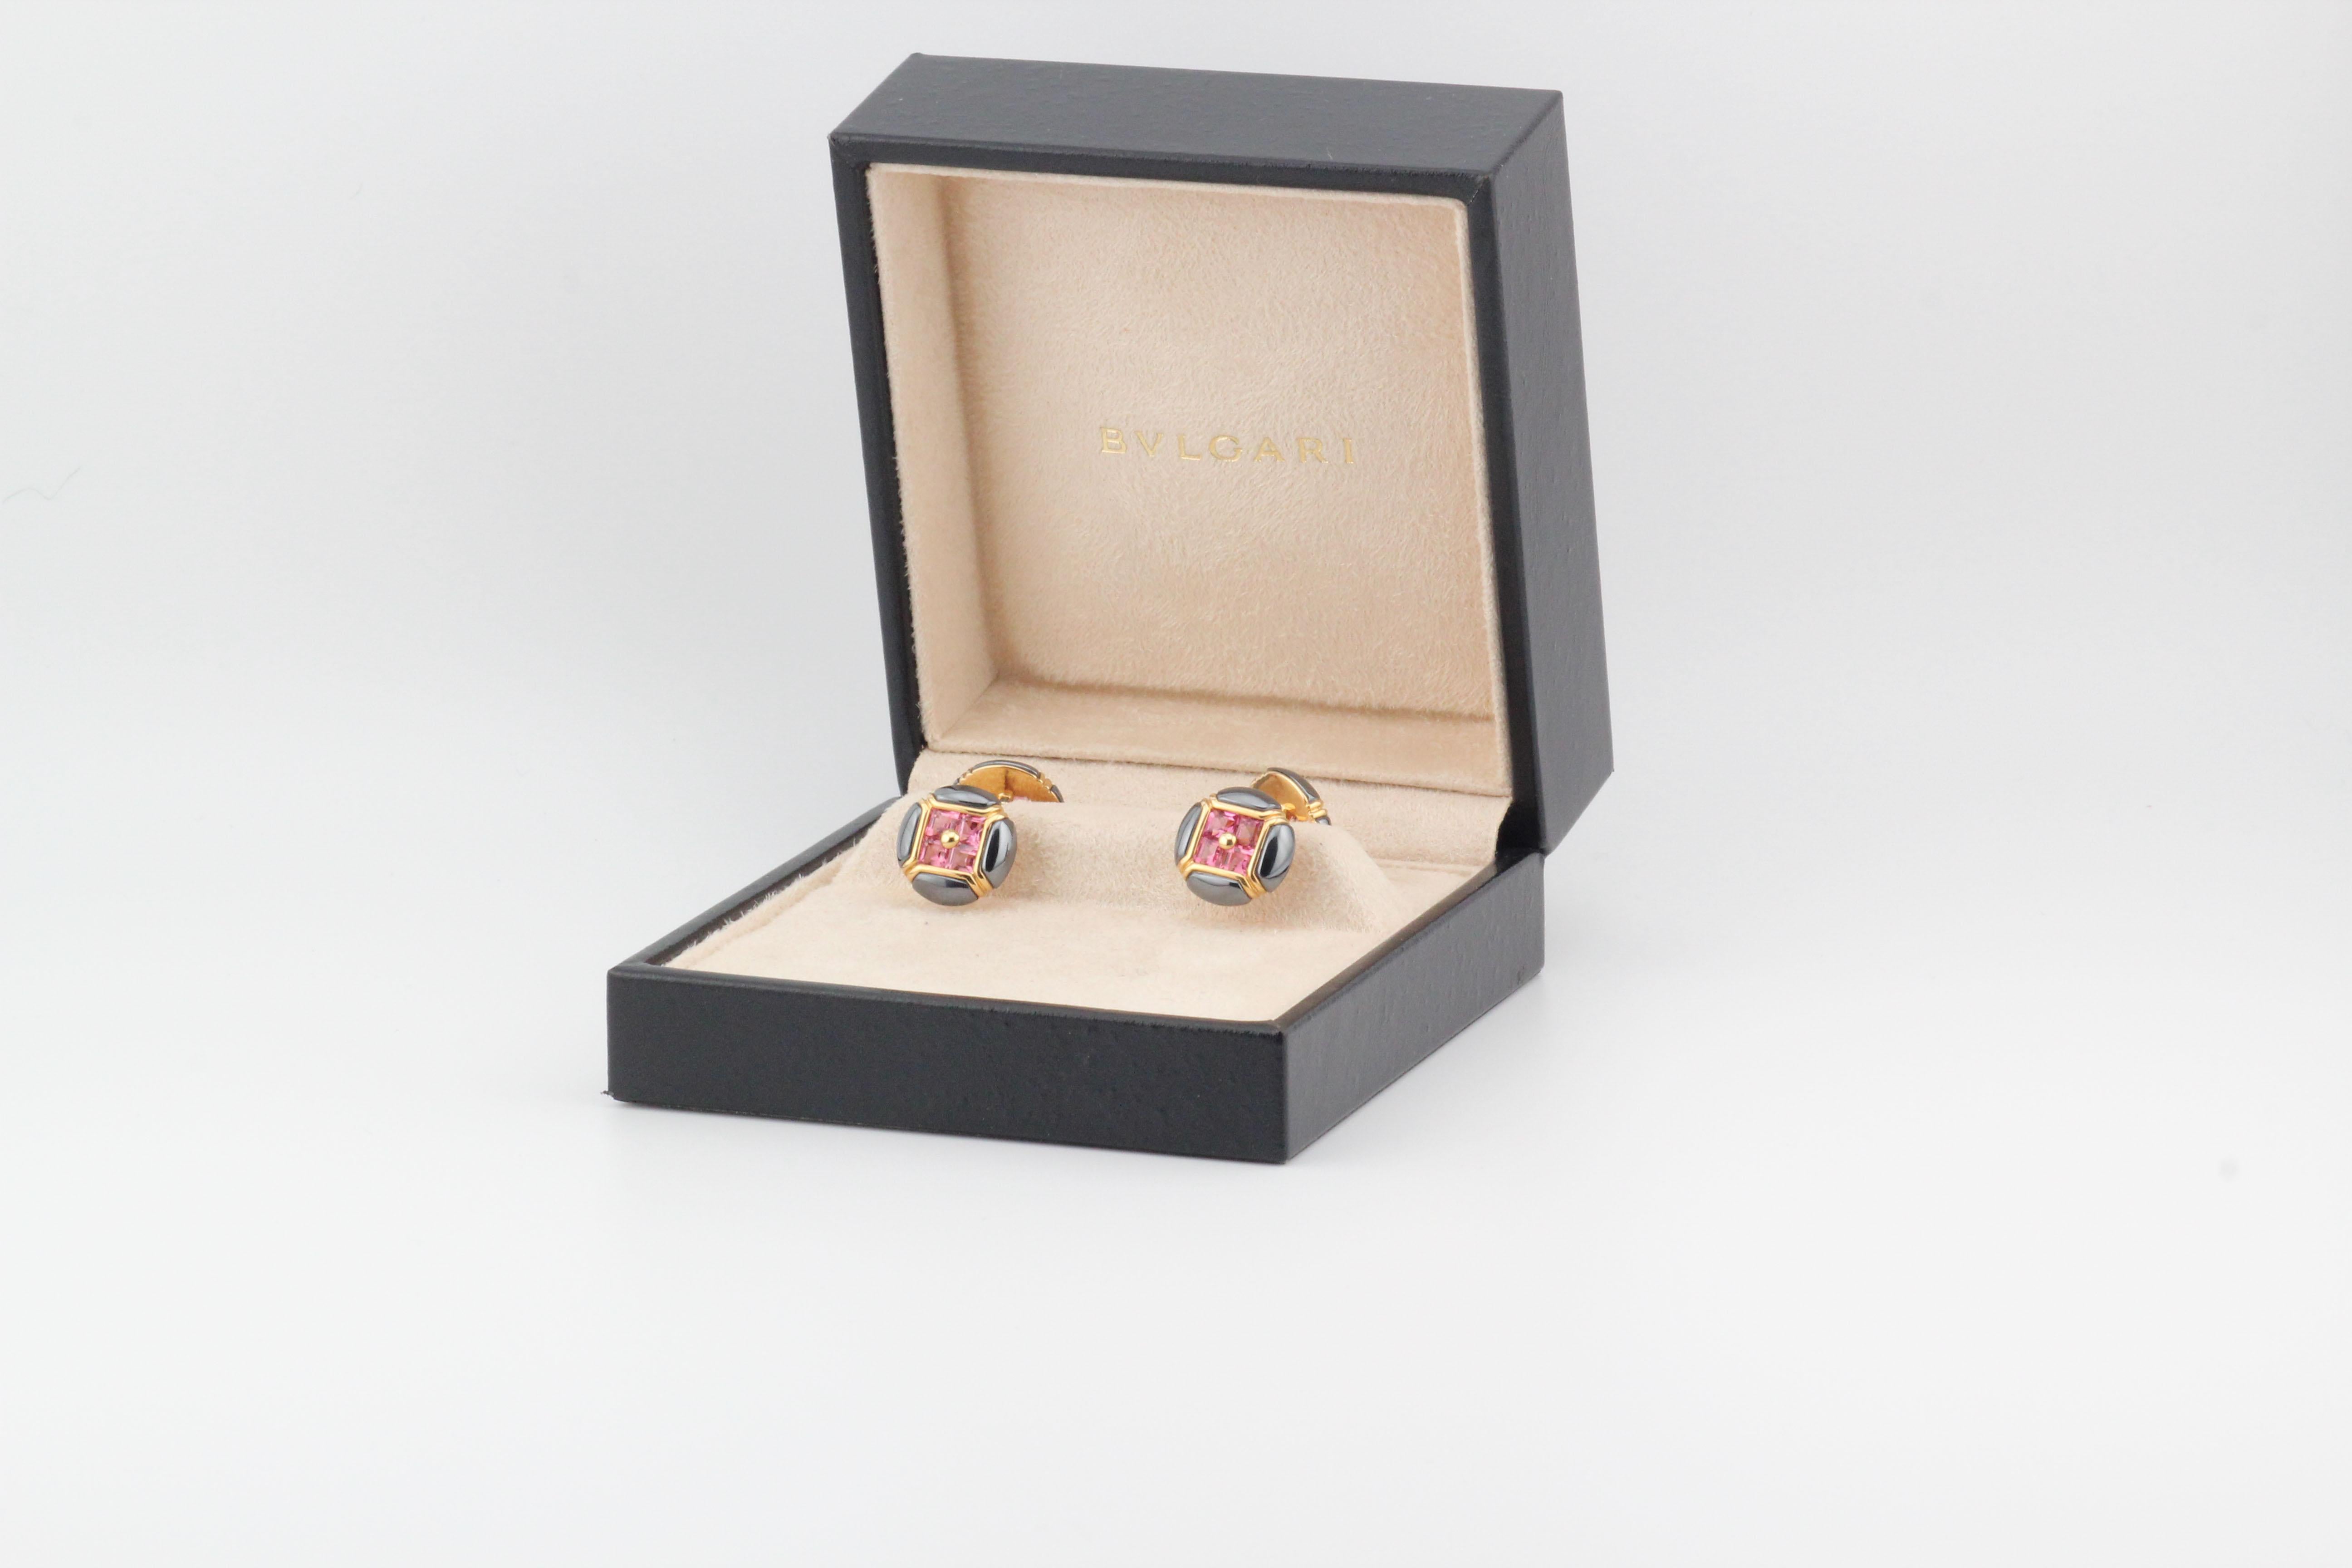 Immerse yourself in the timeless sophistication of the Bulgari Vintage Pink Tourmaline Hematite Inlay 18k Yellow Gold Cufflinks—a rare and exquisite accessory that seamlessly marries luxurious materials with impeccable craftsmanship. Crafted by